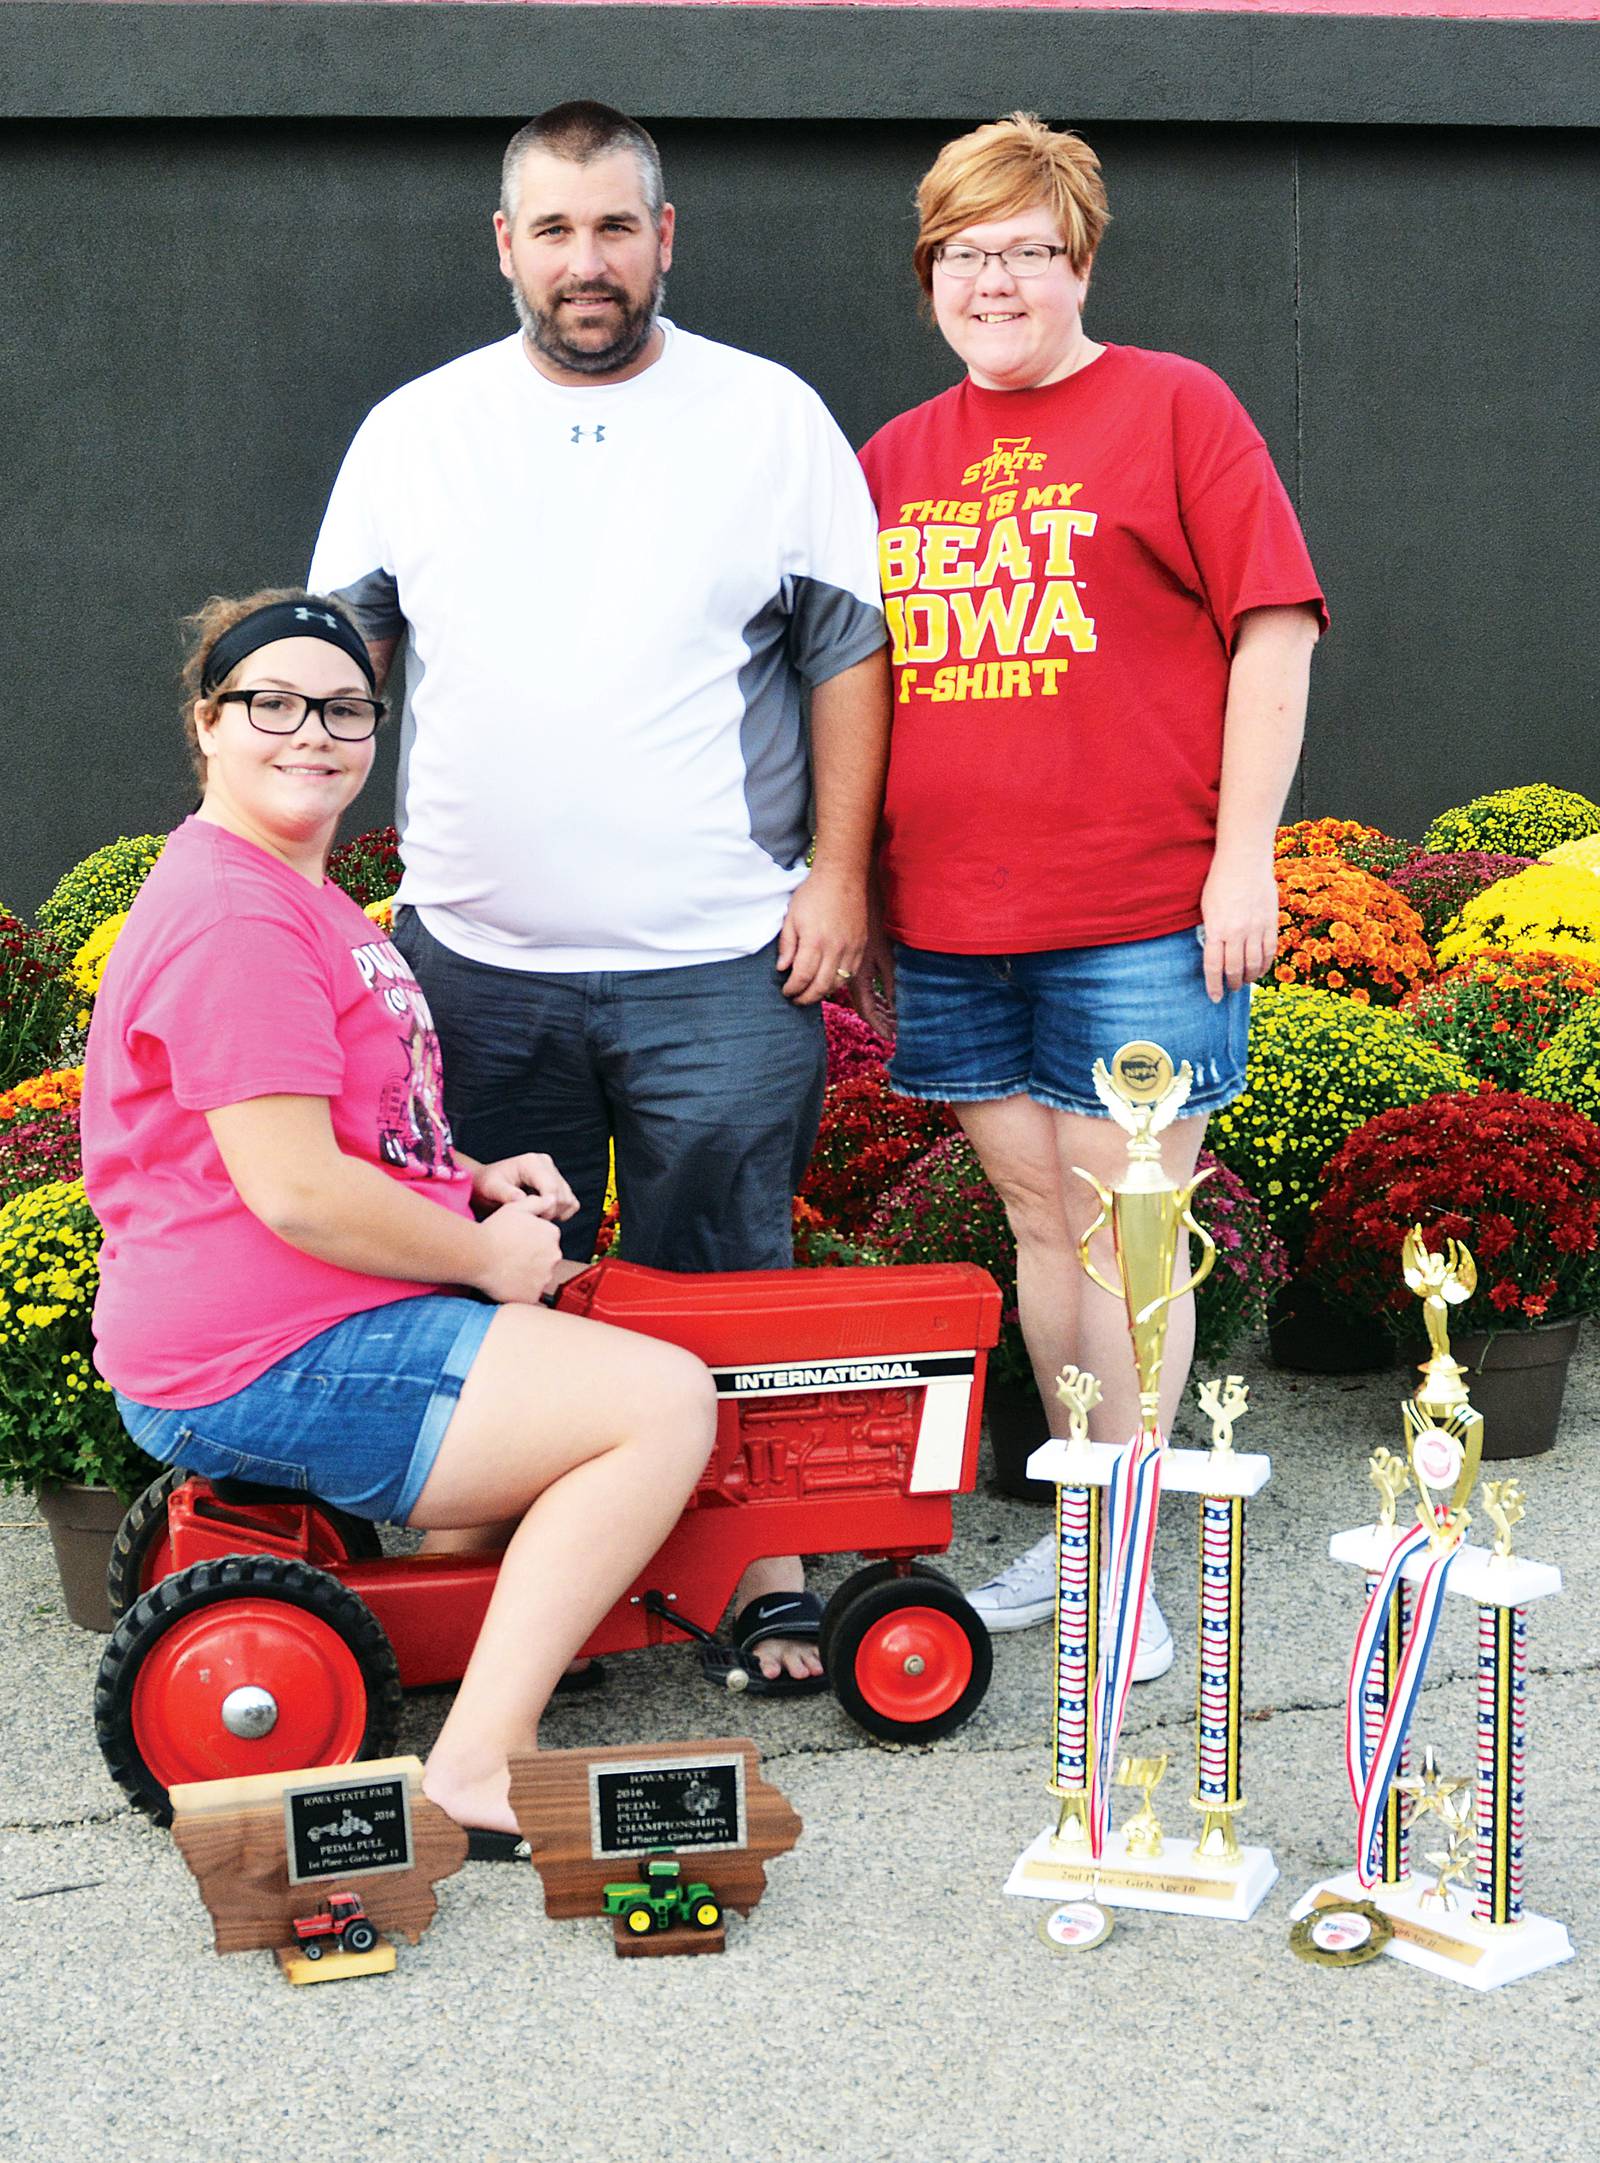 Chafa pulls ahead in national pedal pull competition Creston News